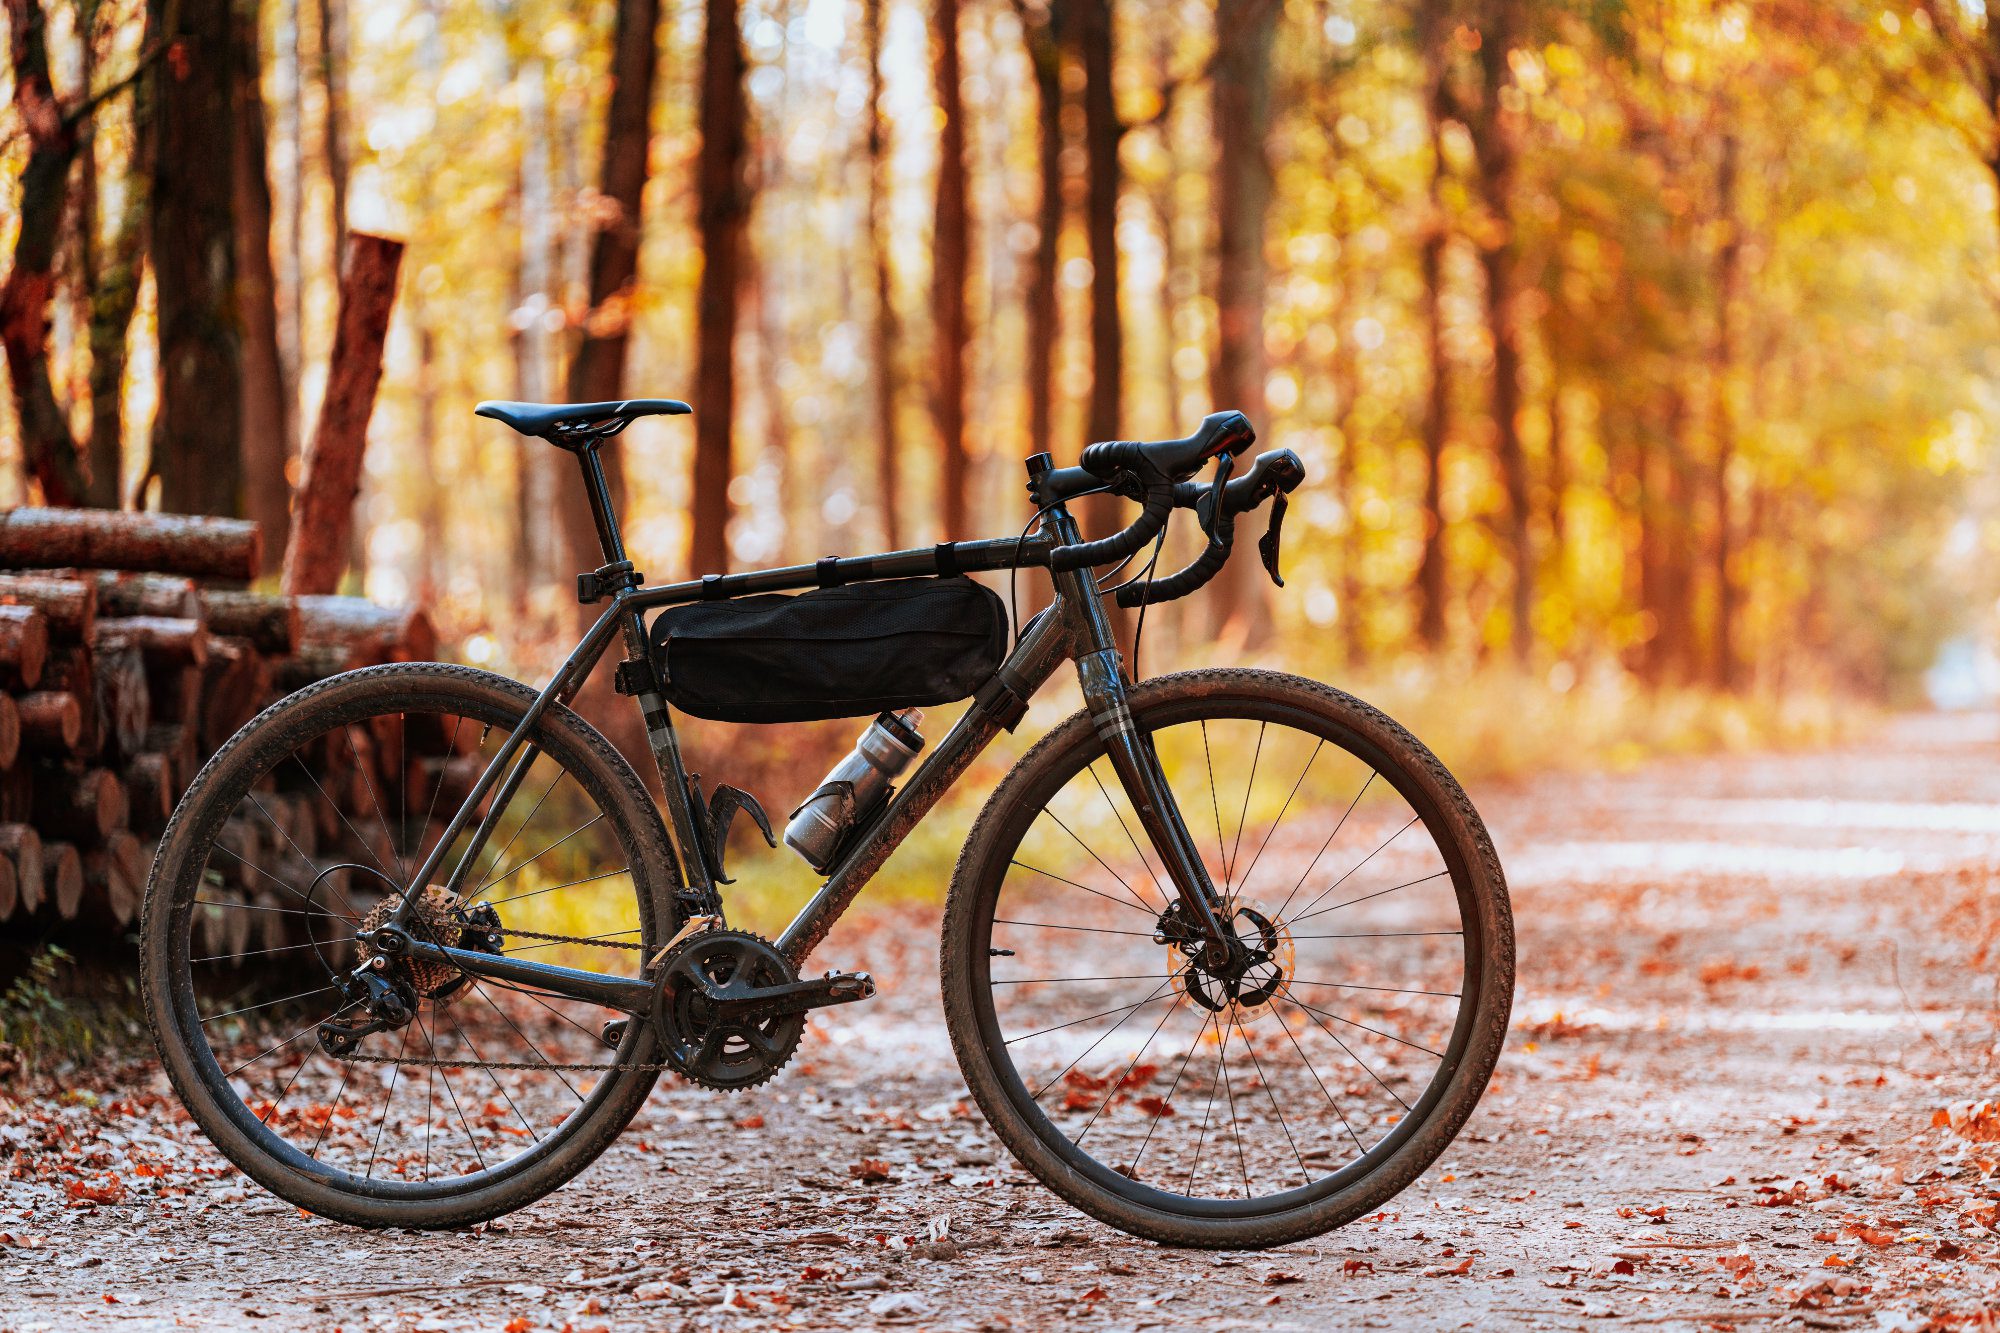 Bike on a gravel path in a woodland